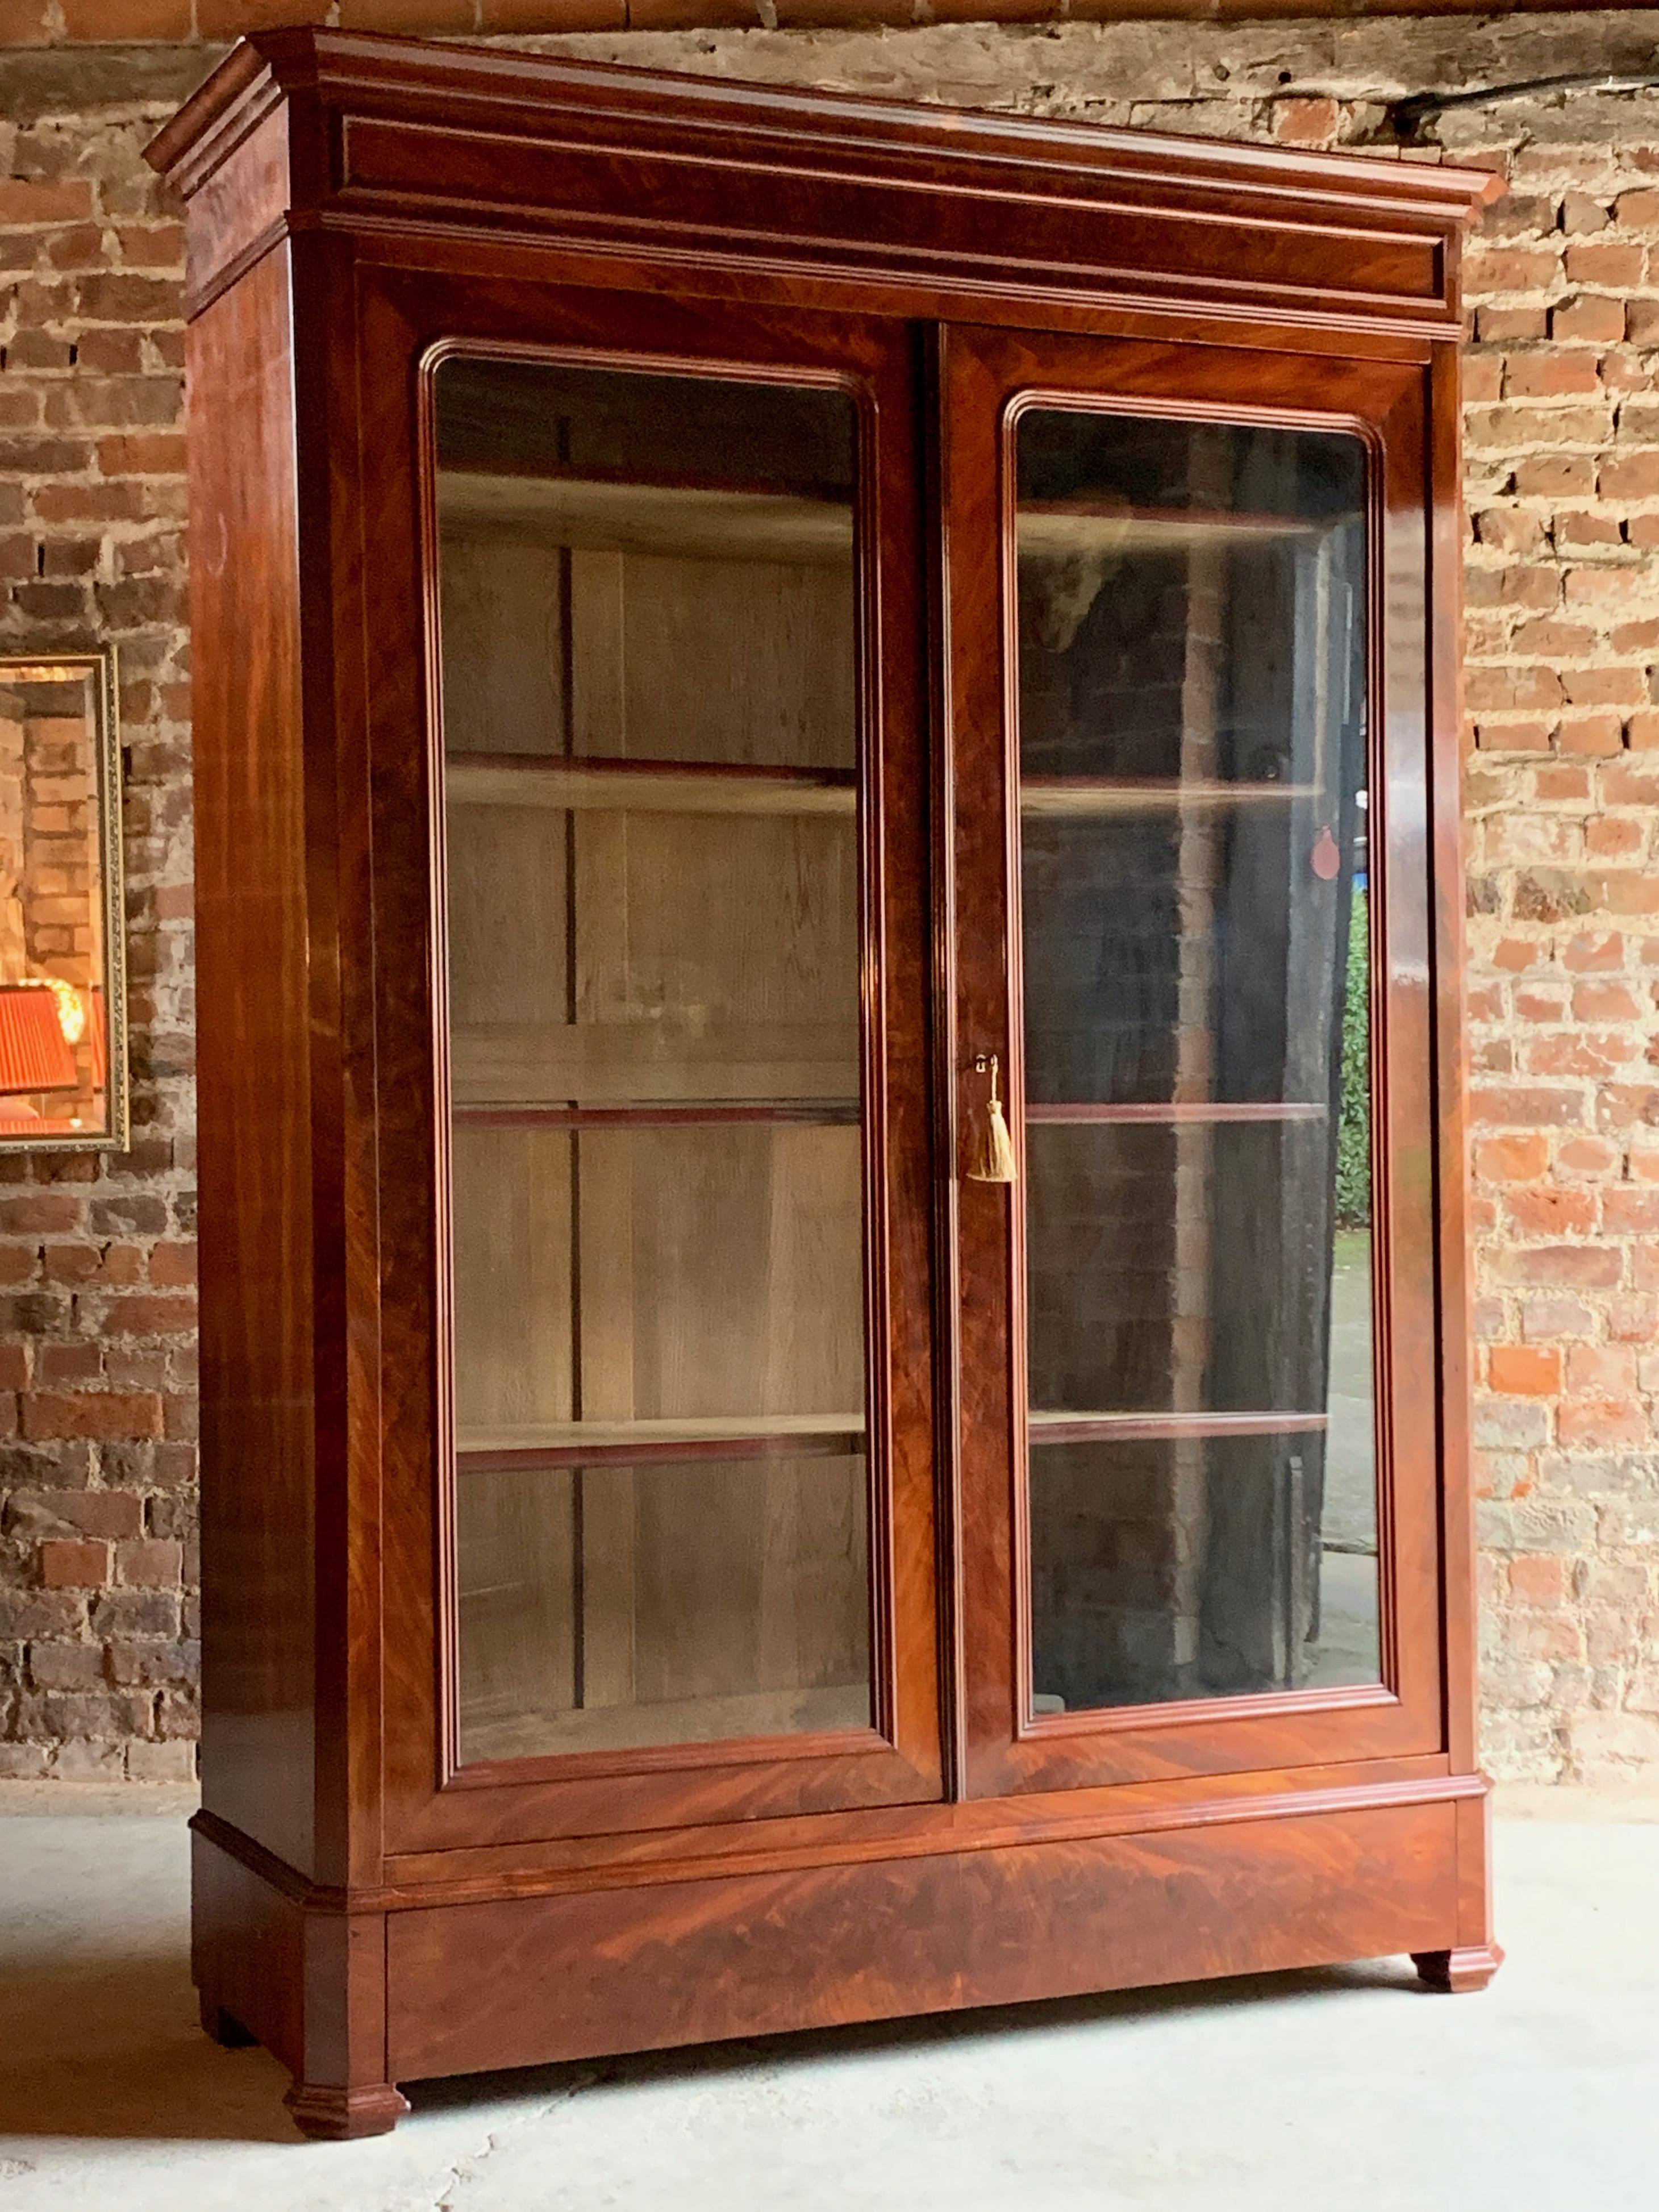 Antique 19th century French flamed mahogany bookcase vitrine, circa 1875

A fabulous 19th century French flamed mahogany two-door bookcase vitrine, circa 1875, the large overhanging cornice above two glazed doors with four adjustable shelves